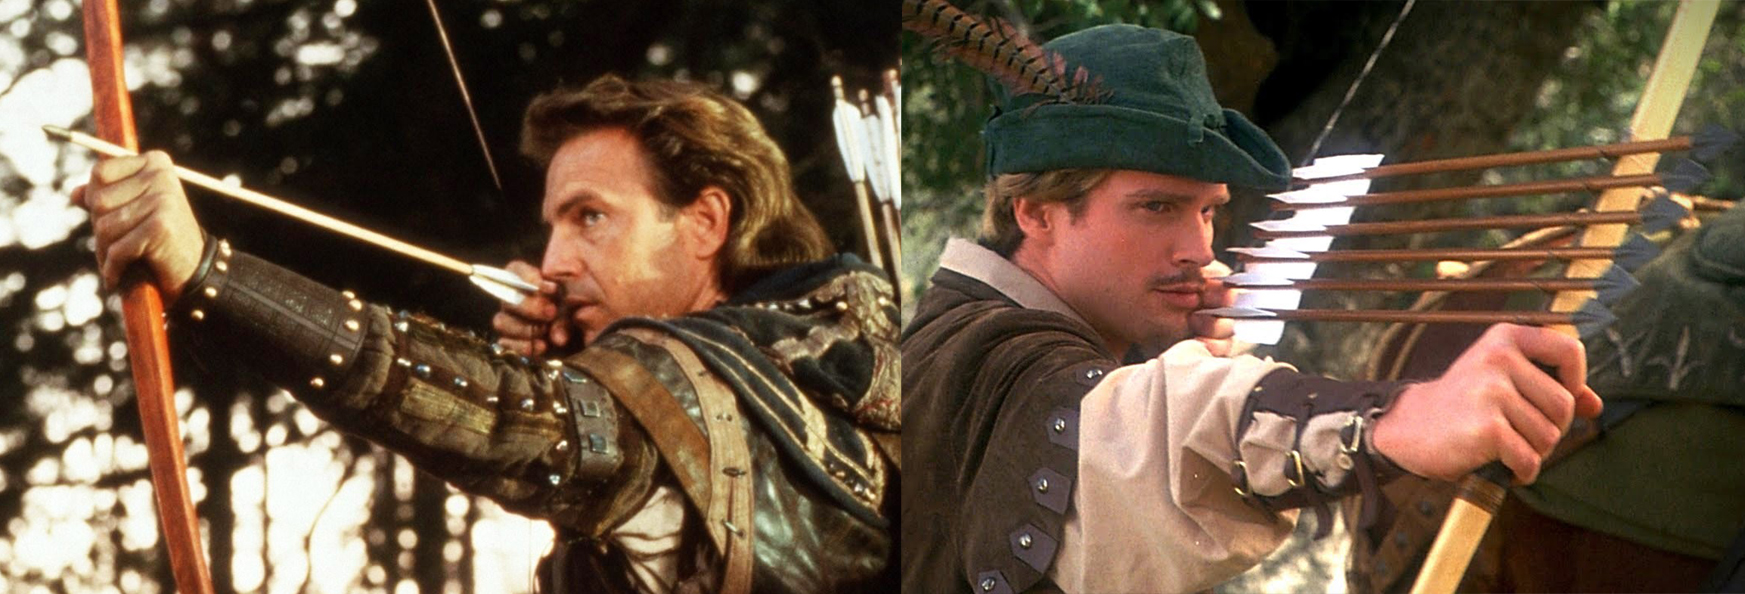 Movie Club Episode 5: Robin Hood Double Feature!